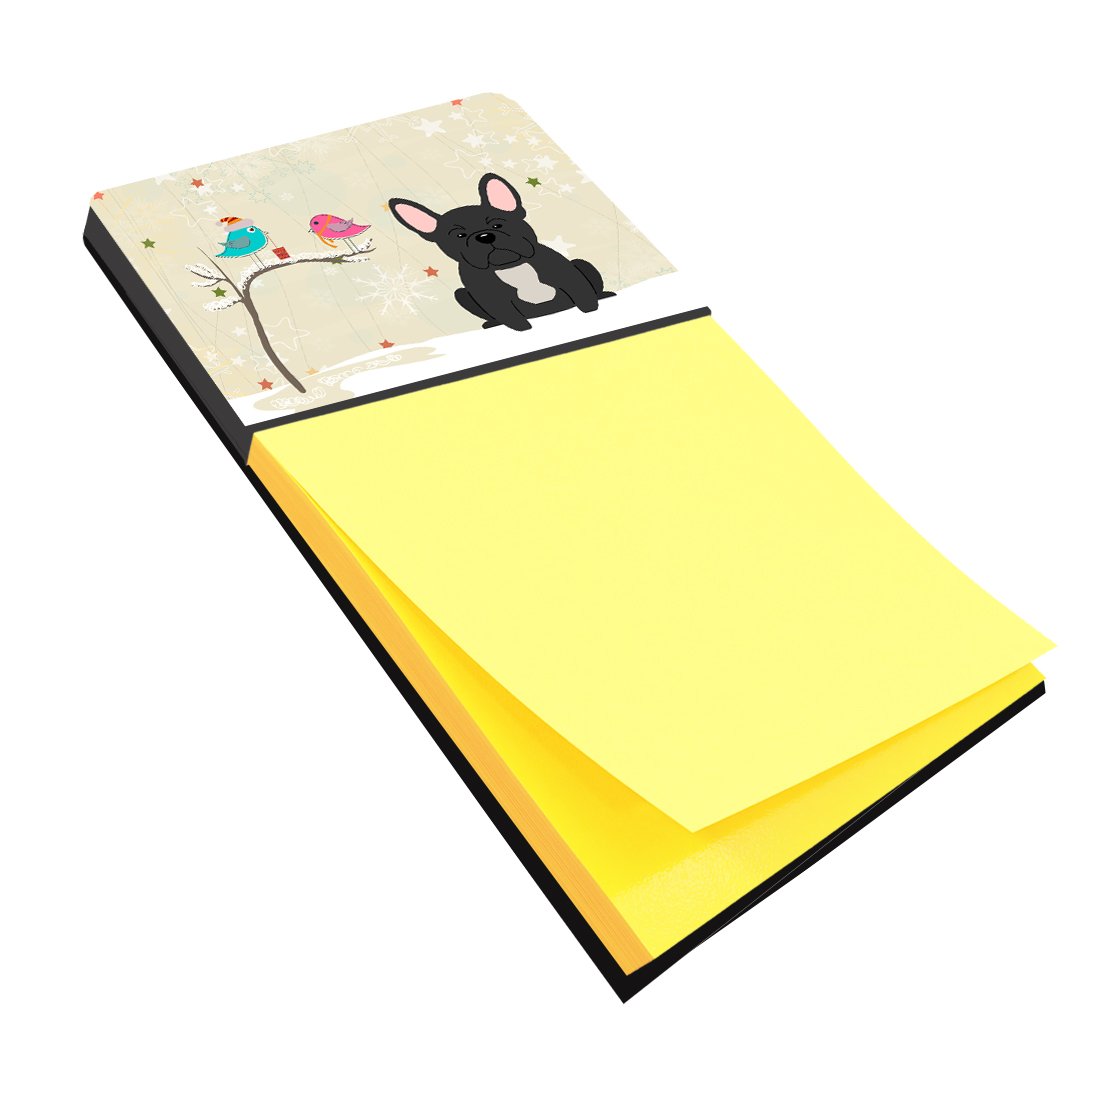 Christmas Presents between Friends French Bulldog Black Sticky Note Holder BB2486SN by Caroline's Treasures